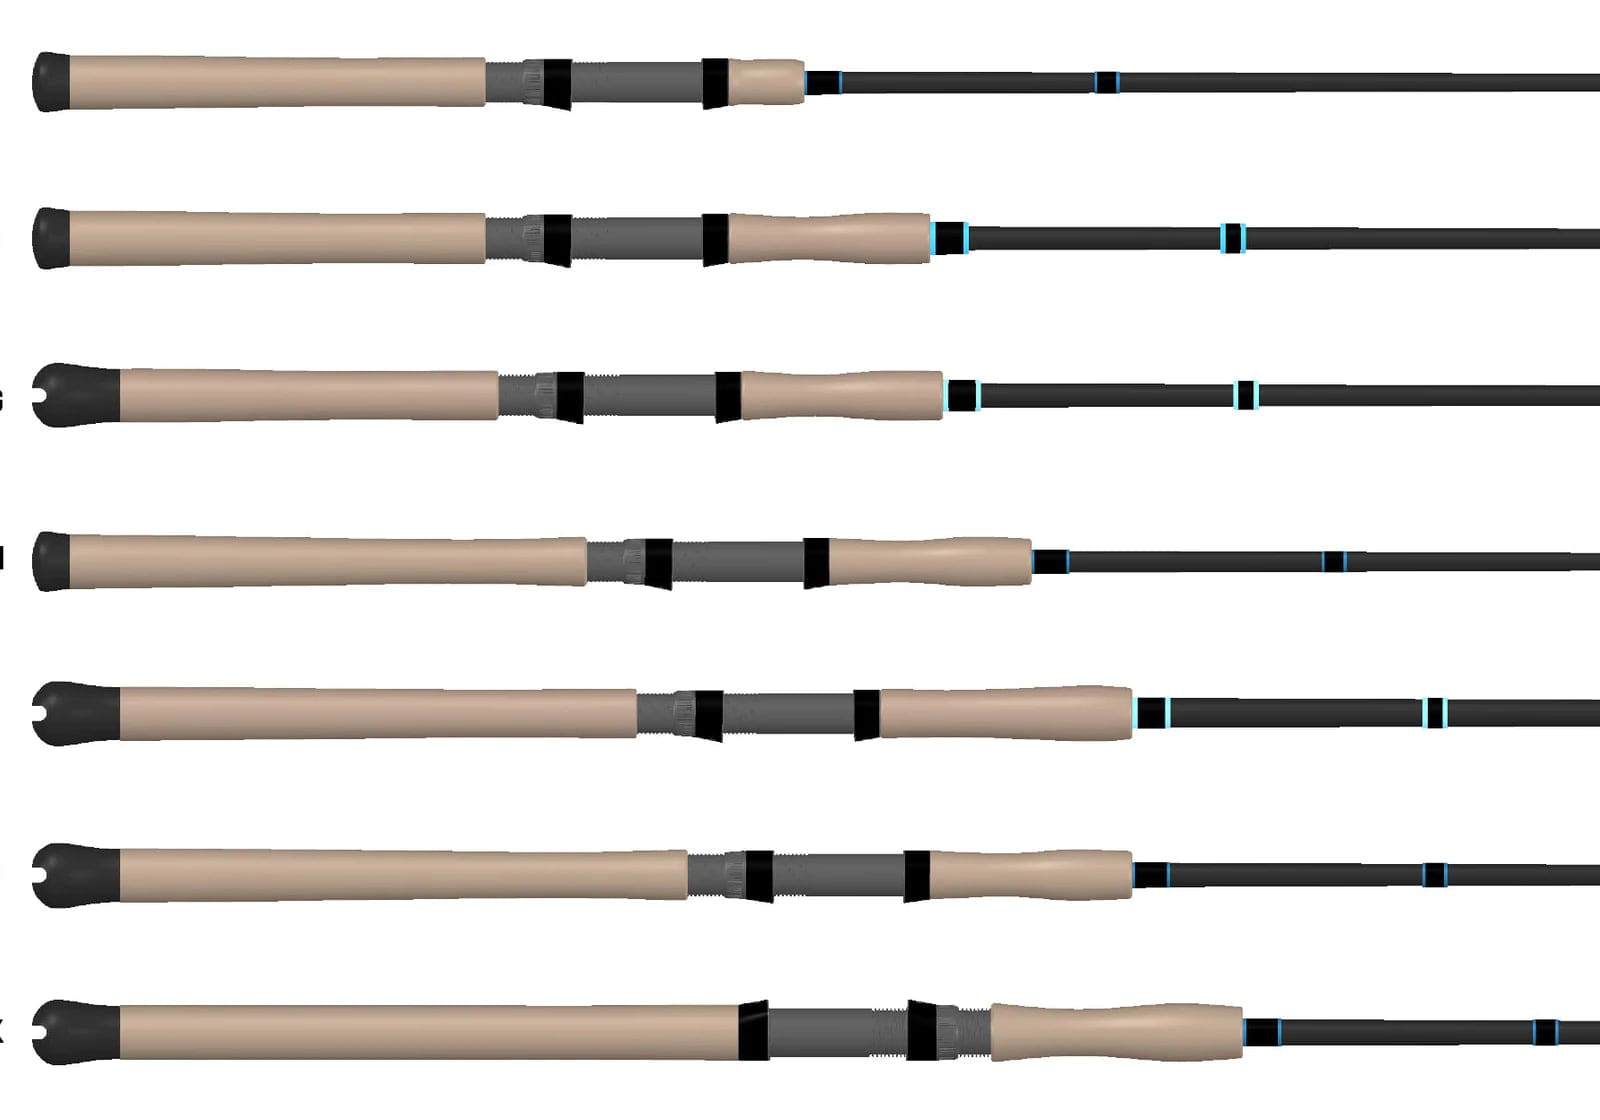 G. Loomis GLX Jig & Worm Spinning Rod – Natural Sports - The